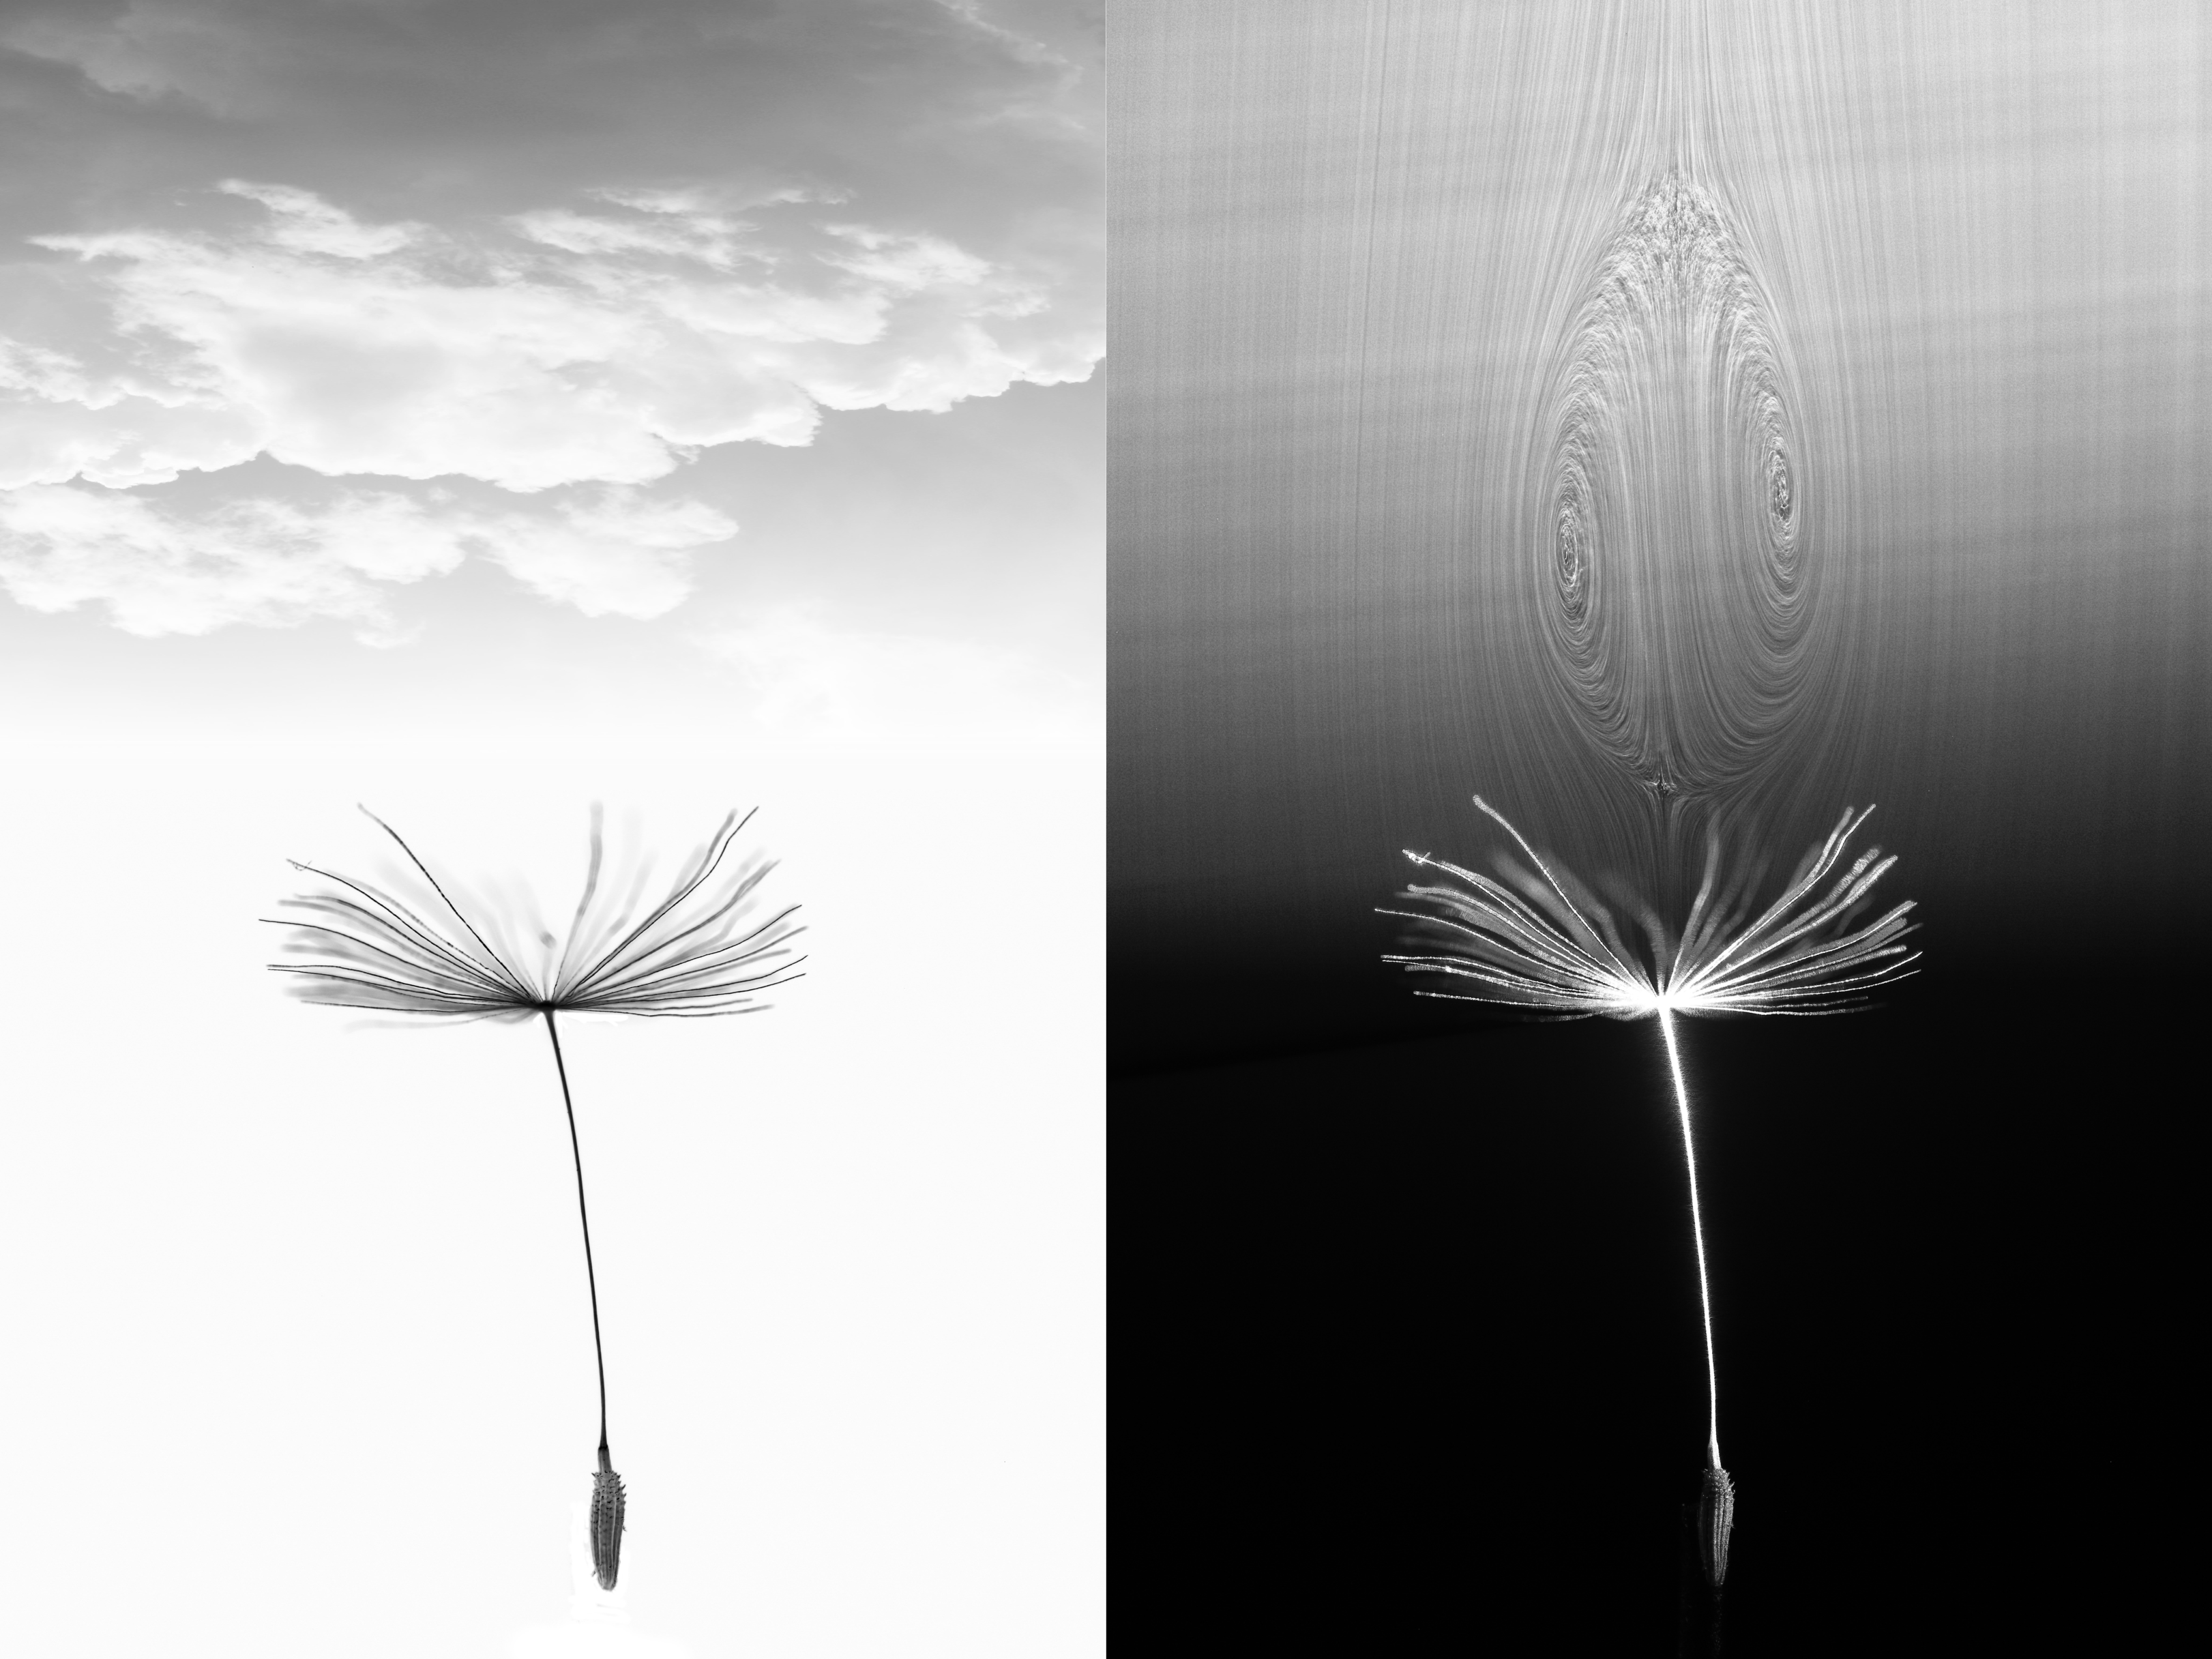 (Left) A dandelion seed in a wind tunnel, with added clouds for effect. (Right) The same dandelion with the flow around it visualised using a laser sheet (contrast enhanced), showing the formation of a drag-enhancing vortex unlike any other observed before in nature, which we term a 'halo' vortex.